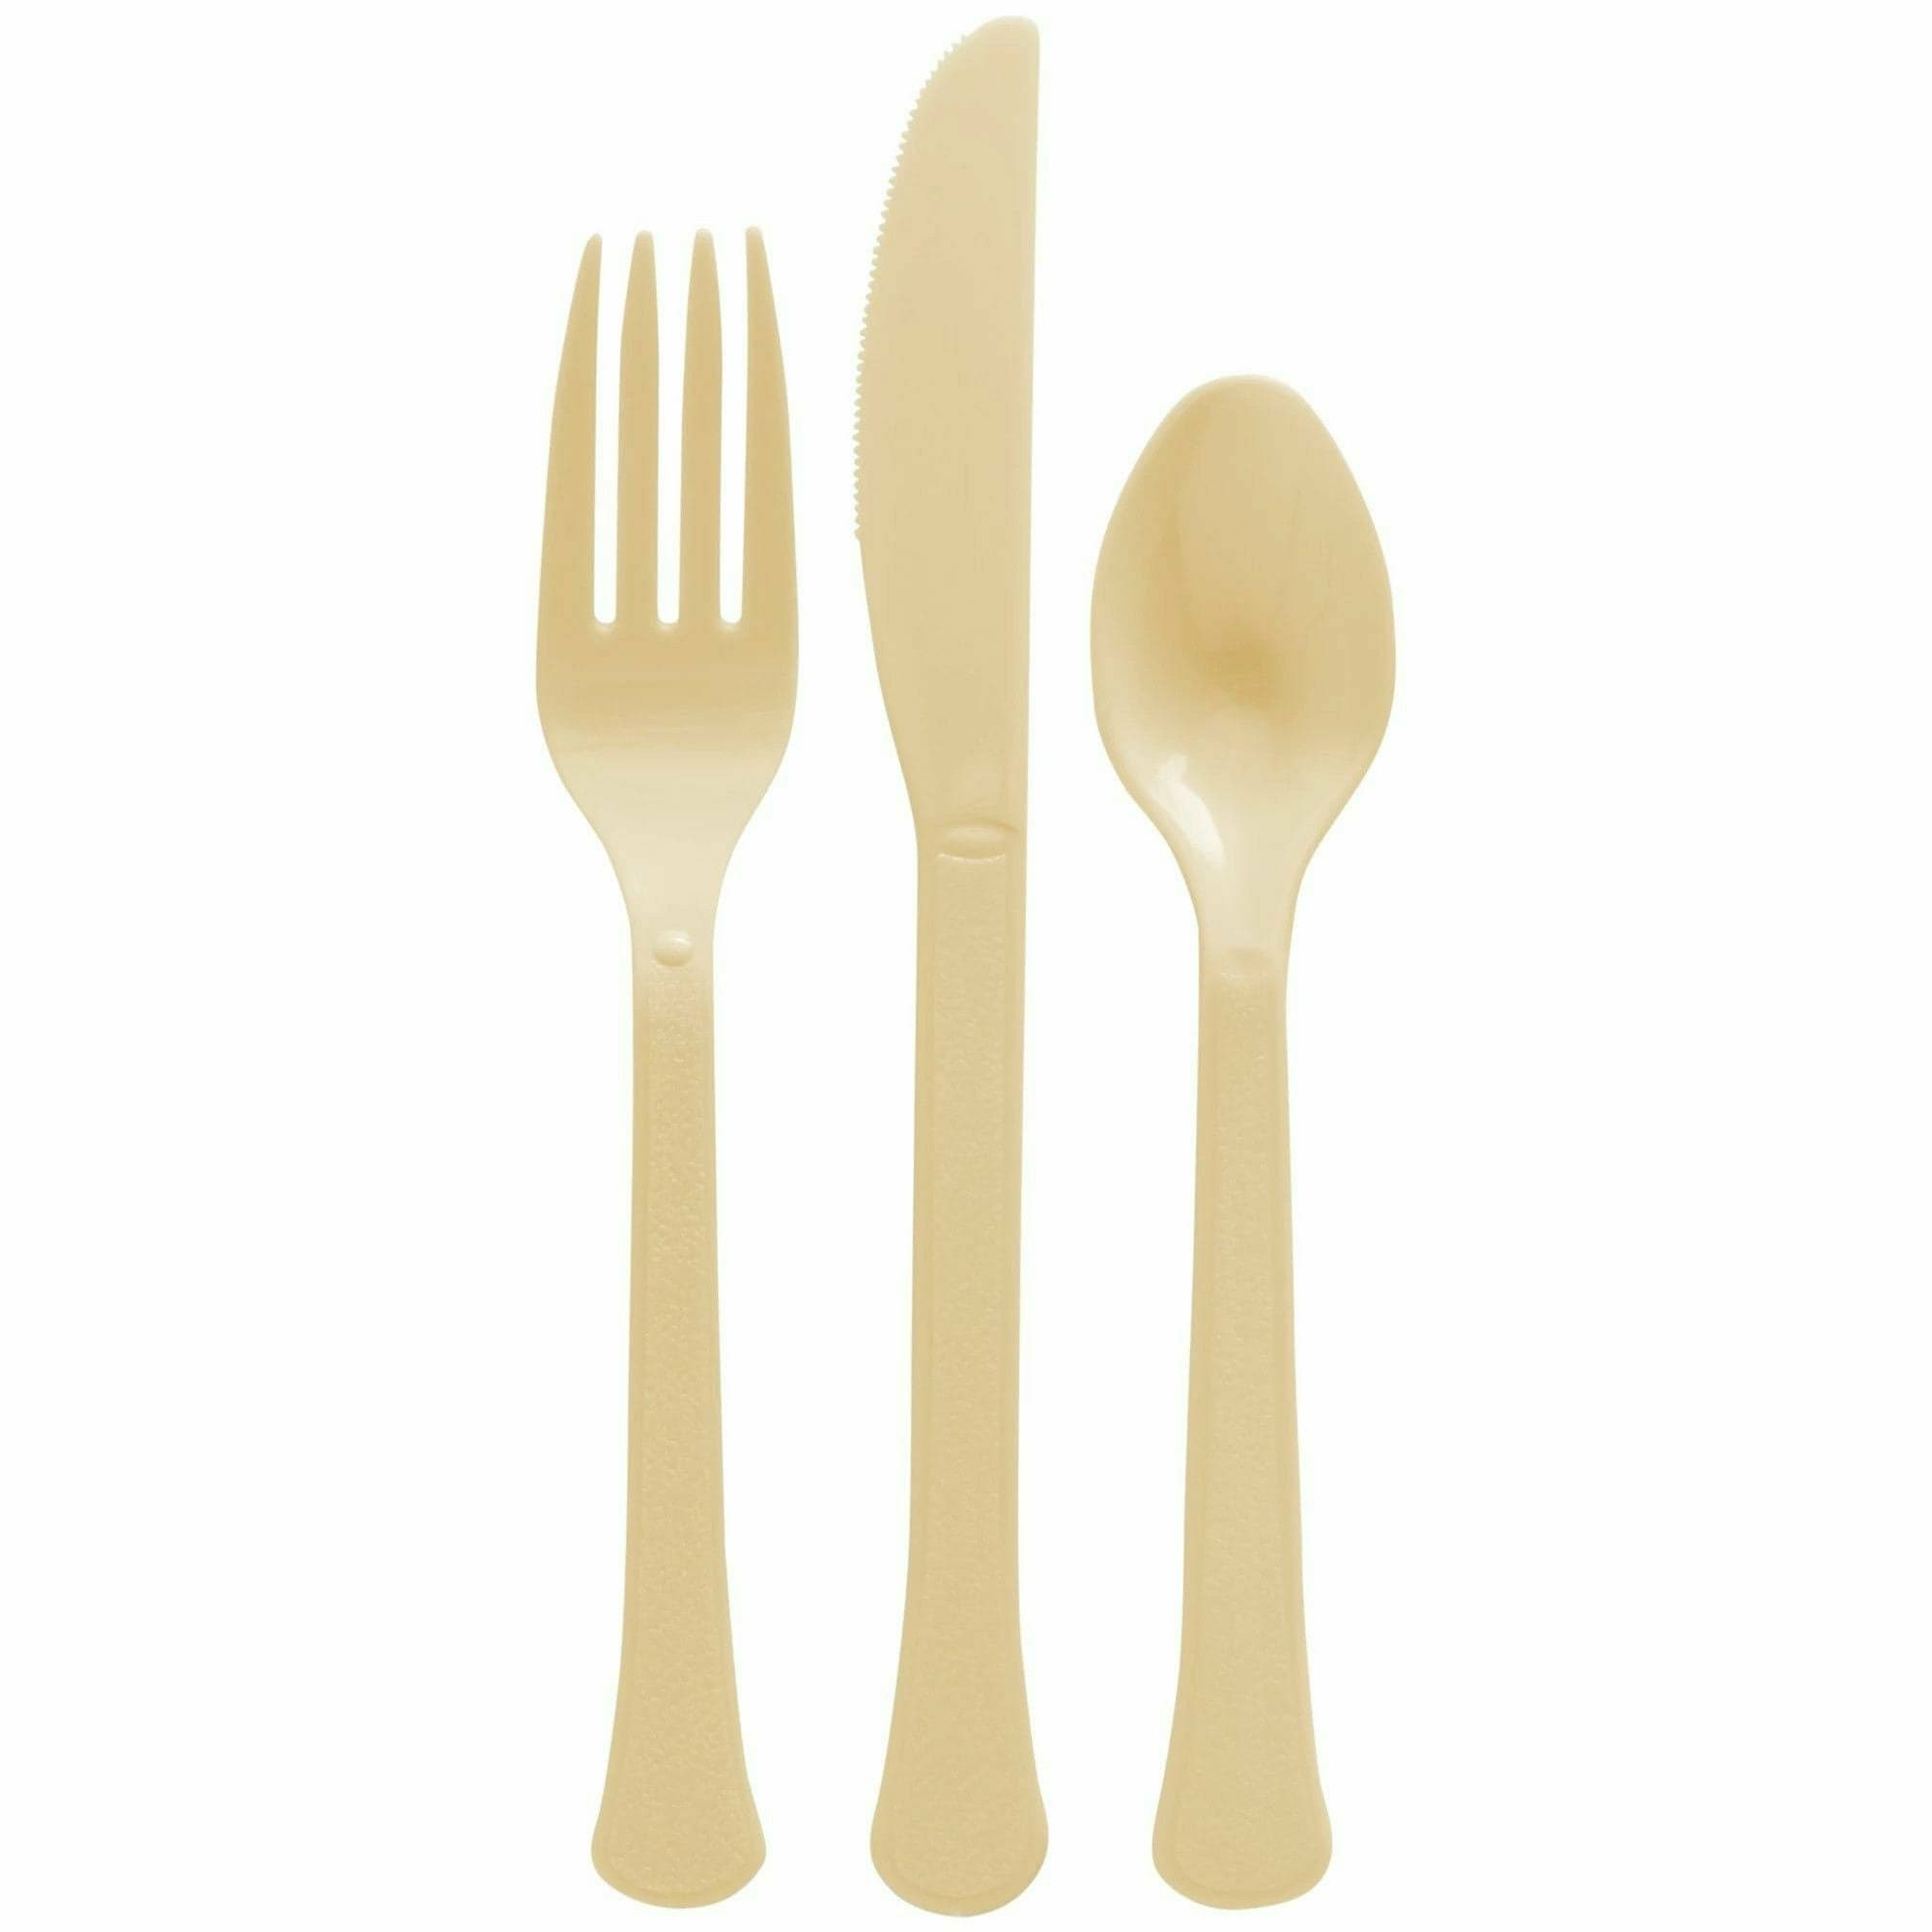 Amscan BASIC Gold - Boxed, Heavy Weight Cutlery Asst., 80 Ct.